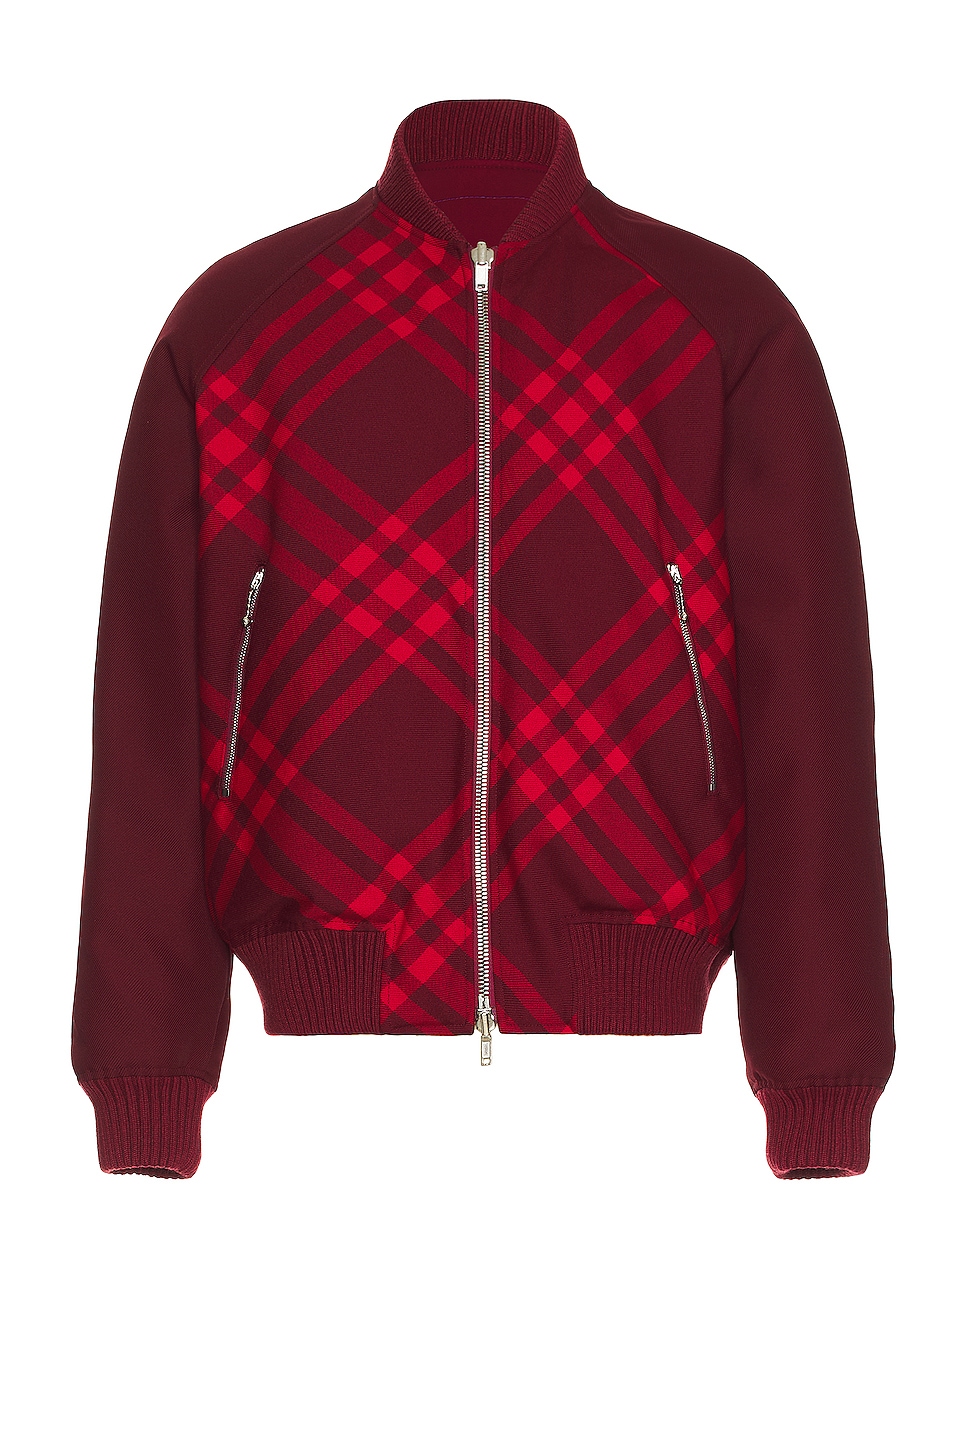 Image 1 of Burberry Ripple Check Jacket in Ripple Ip Check